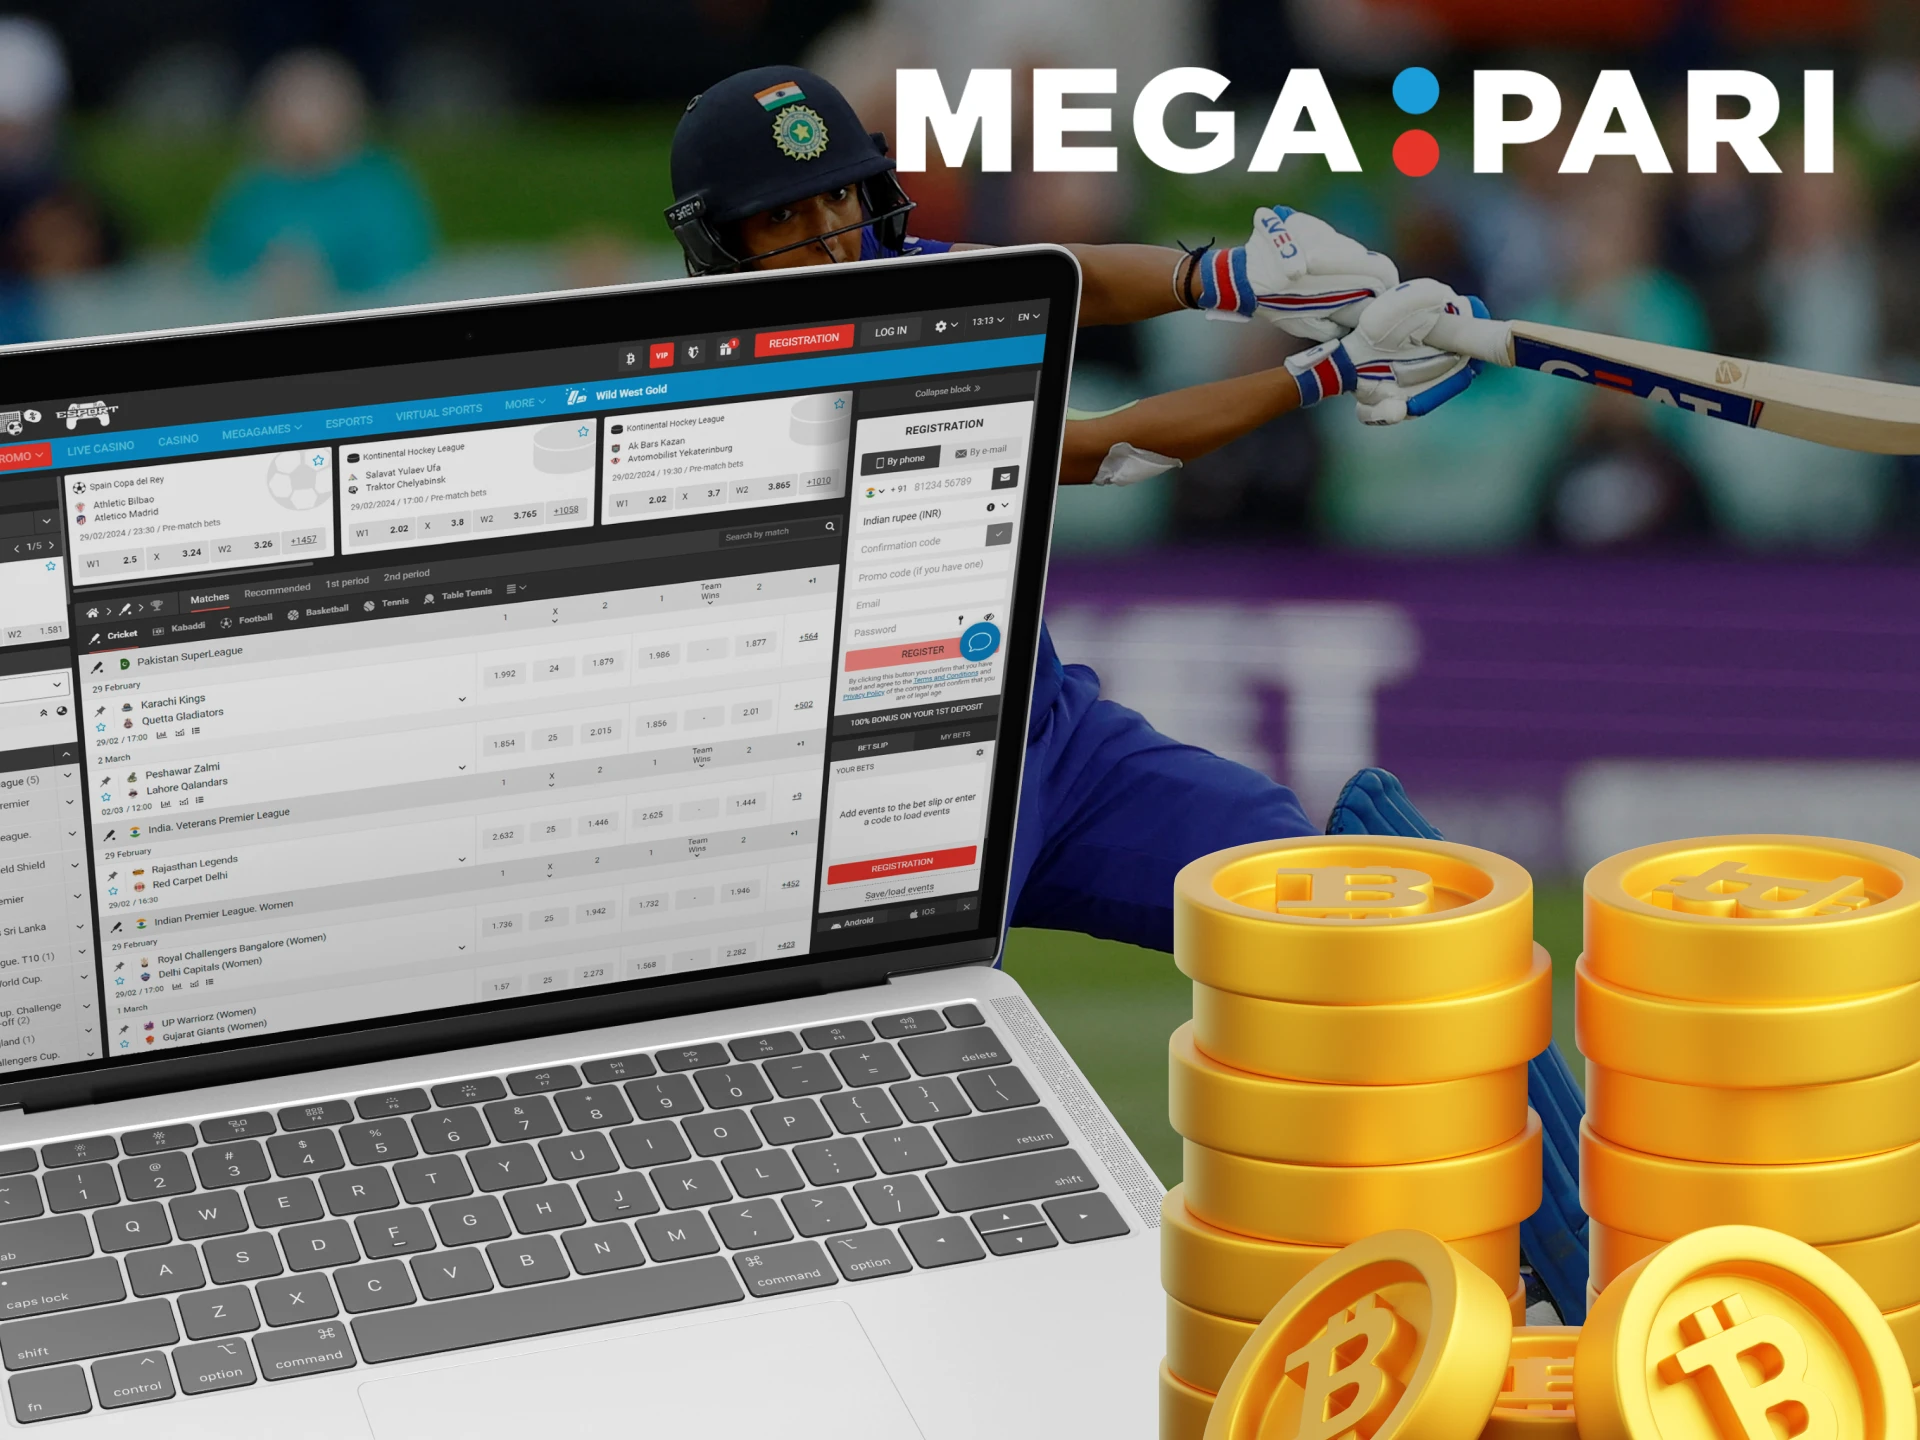 Megapari offers betting on cricket using cryptocurrency.